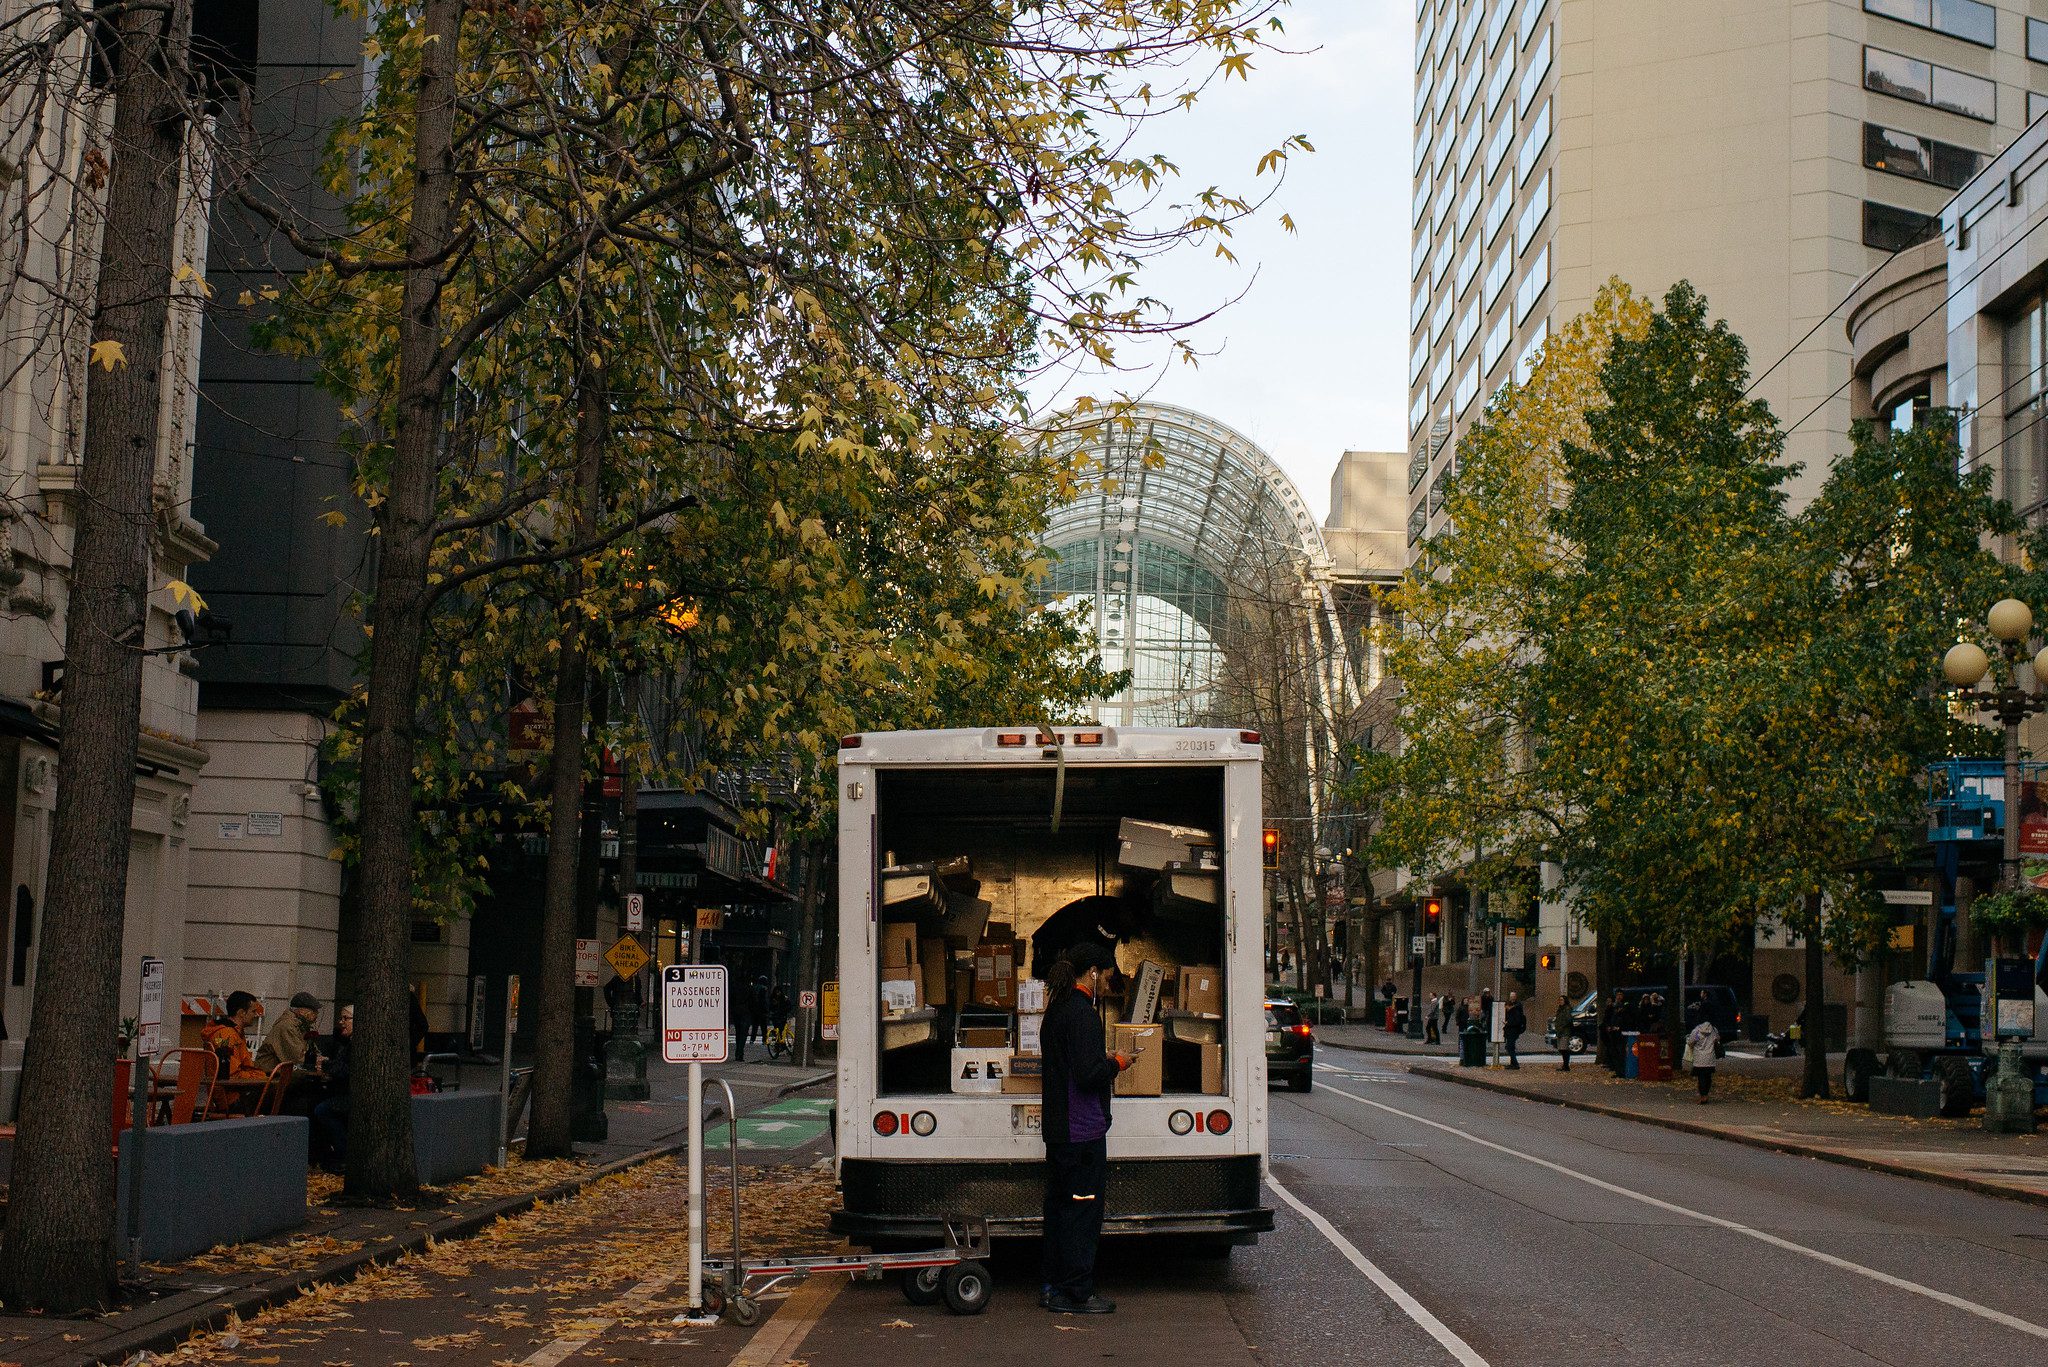 A person unloads boxes and packages from a white truck in downtown Seattle on a cloudy day. People are in the background, along with trees and large buildings.